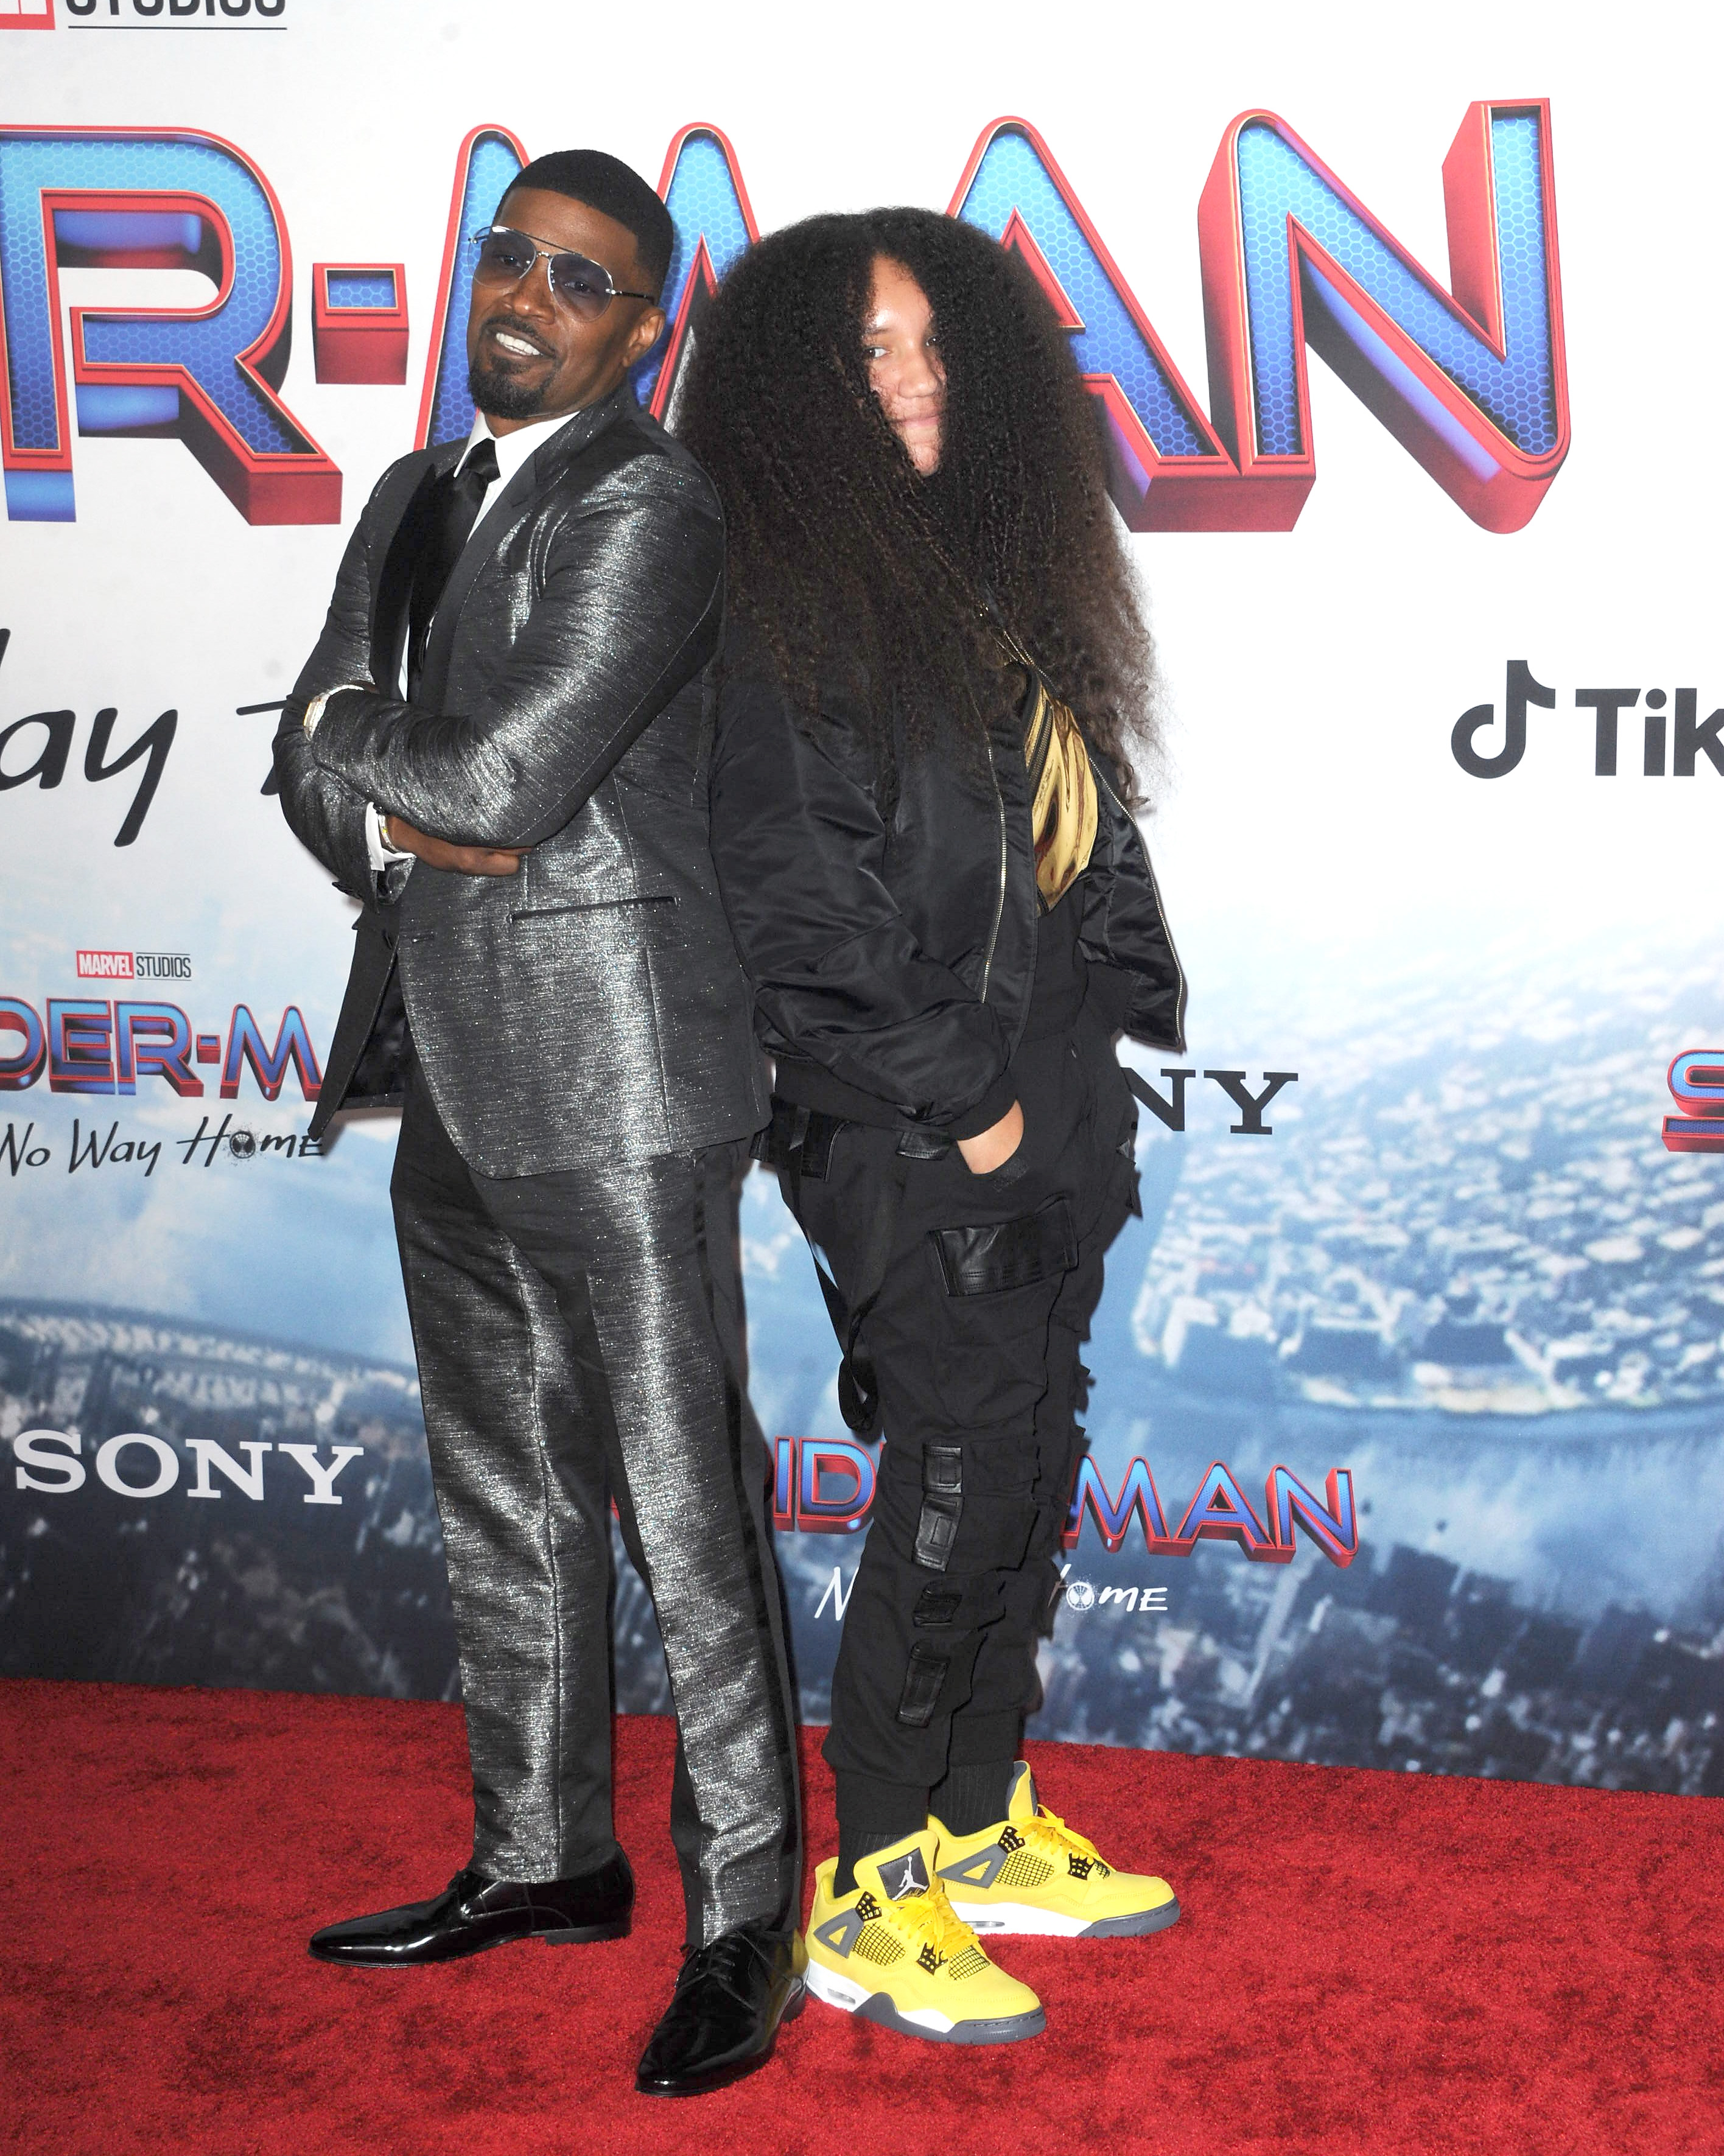 Jamie Foxx and Anelise Bishop at the "Spider-Man: No Way Home" Los Angeles premiere on December 13, 2021, in California | Source: Getty Images